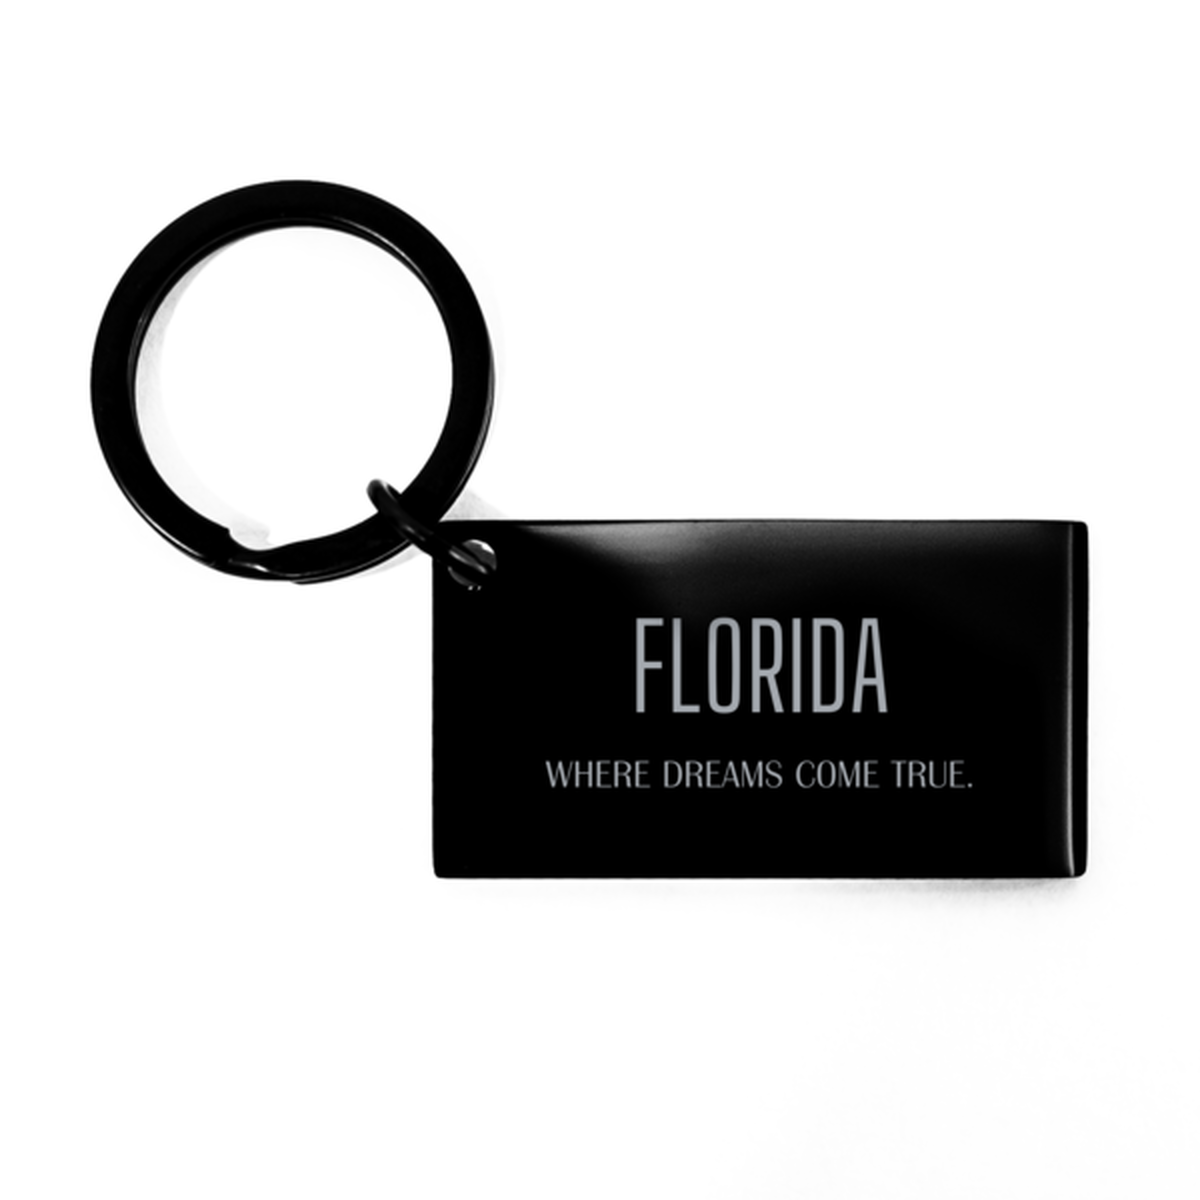 Love Florida State Keychain, Florida Where dreams come true, Birthday Inspirational Gifts For Florida Men, Women, Friends